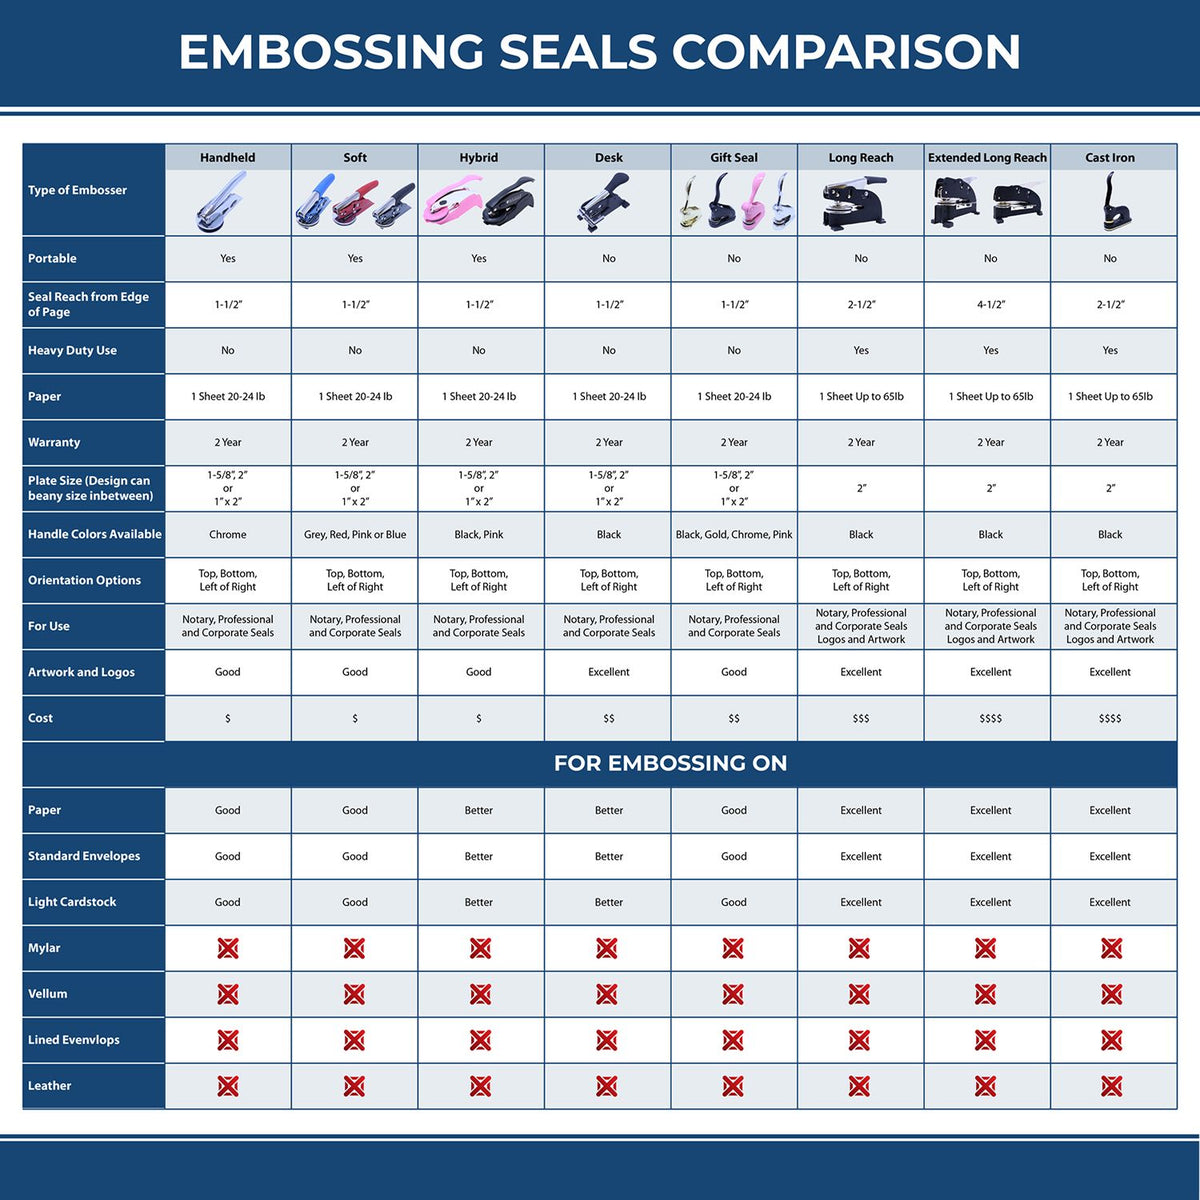 A comparison chart for the different types of mount models available for the New Jersey Geologist Desk Seal